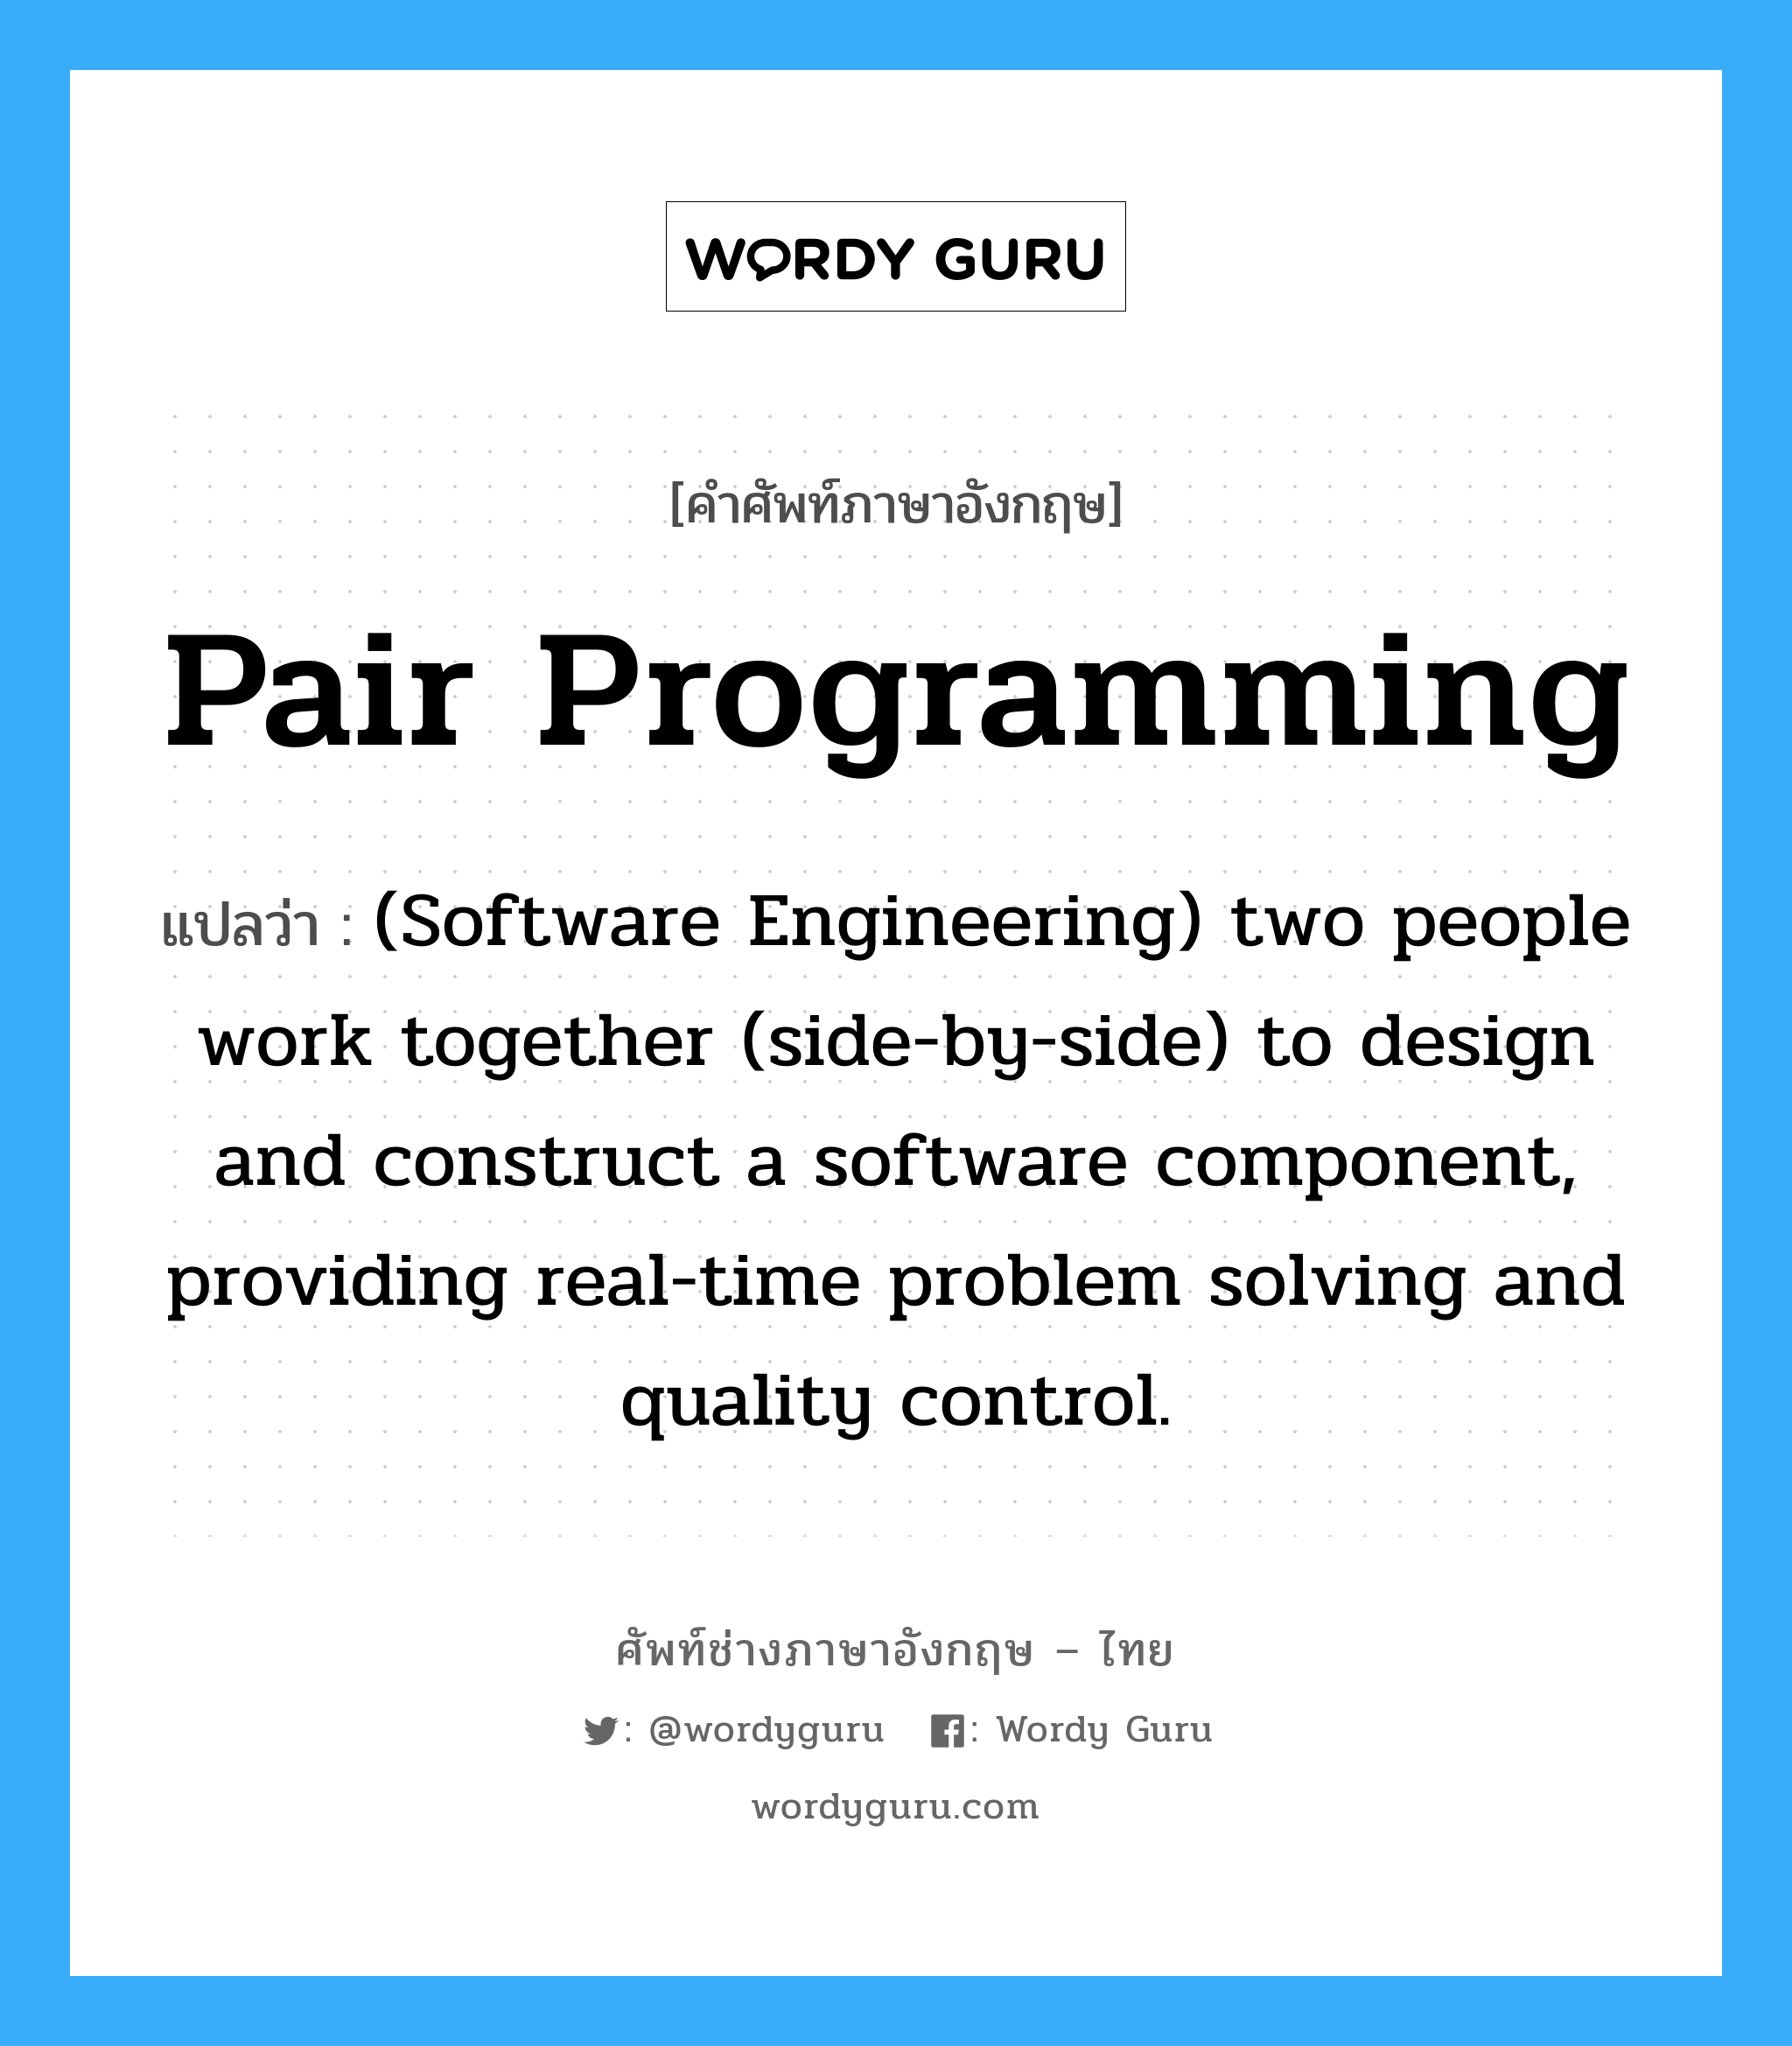 (Software Engineering) two people work together (side-by-side) to design and construct a software component, providing real-time problem solving and quality control. ภาษาอังกฤษ?, คำศัพท์ช่างภาษาอังกฤษ - ไทย (Software Engineering) two people work together (side-by-side) to design and construct a software component, providing real-time problem solving and quality control. คำศัพท์ภาษาอังกฤษ (Software Engineering) two people work together (side-by-side) to design and construct a software component, providing real-time problem solving and quality control. แปลว่า Pair programming